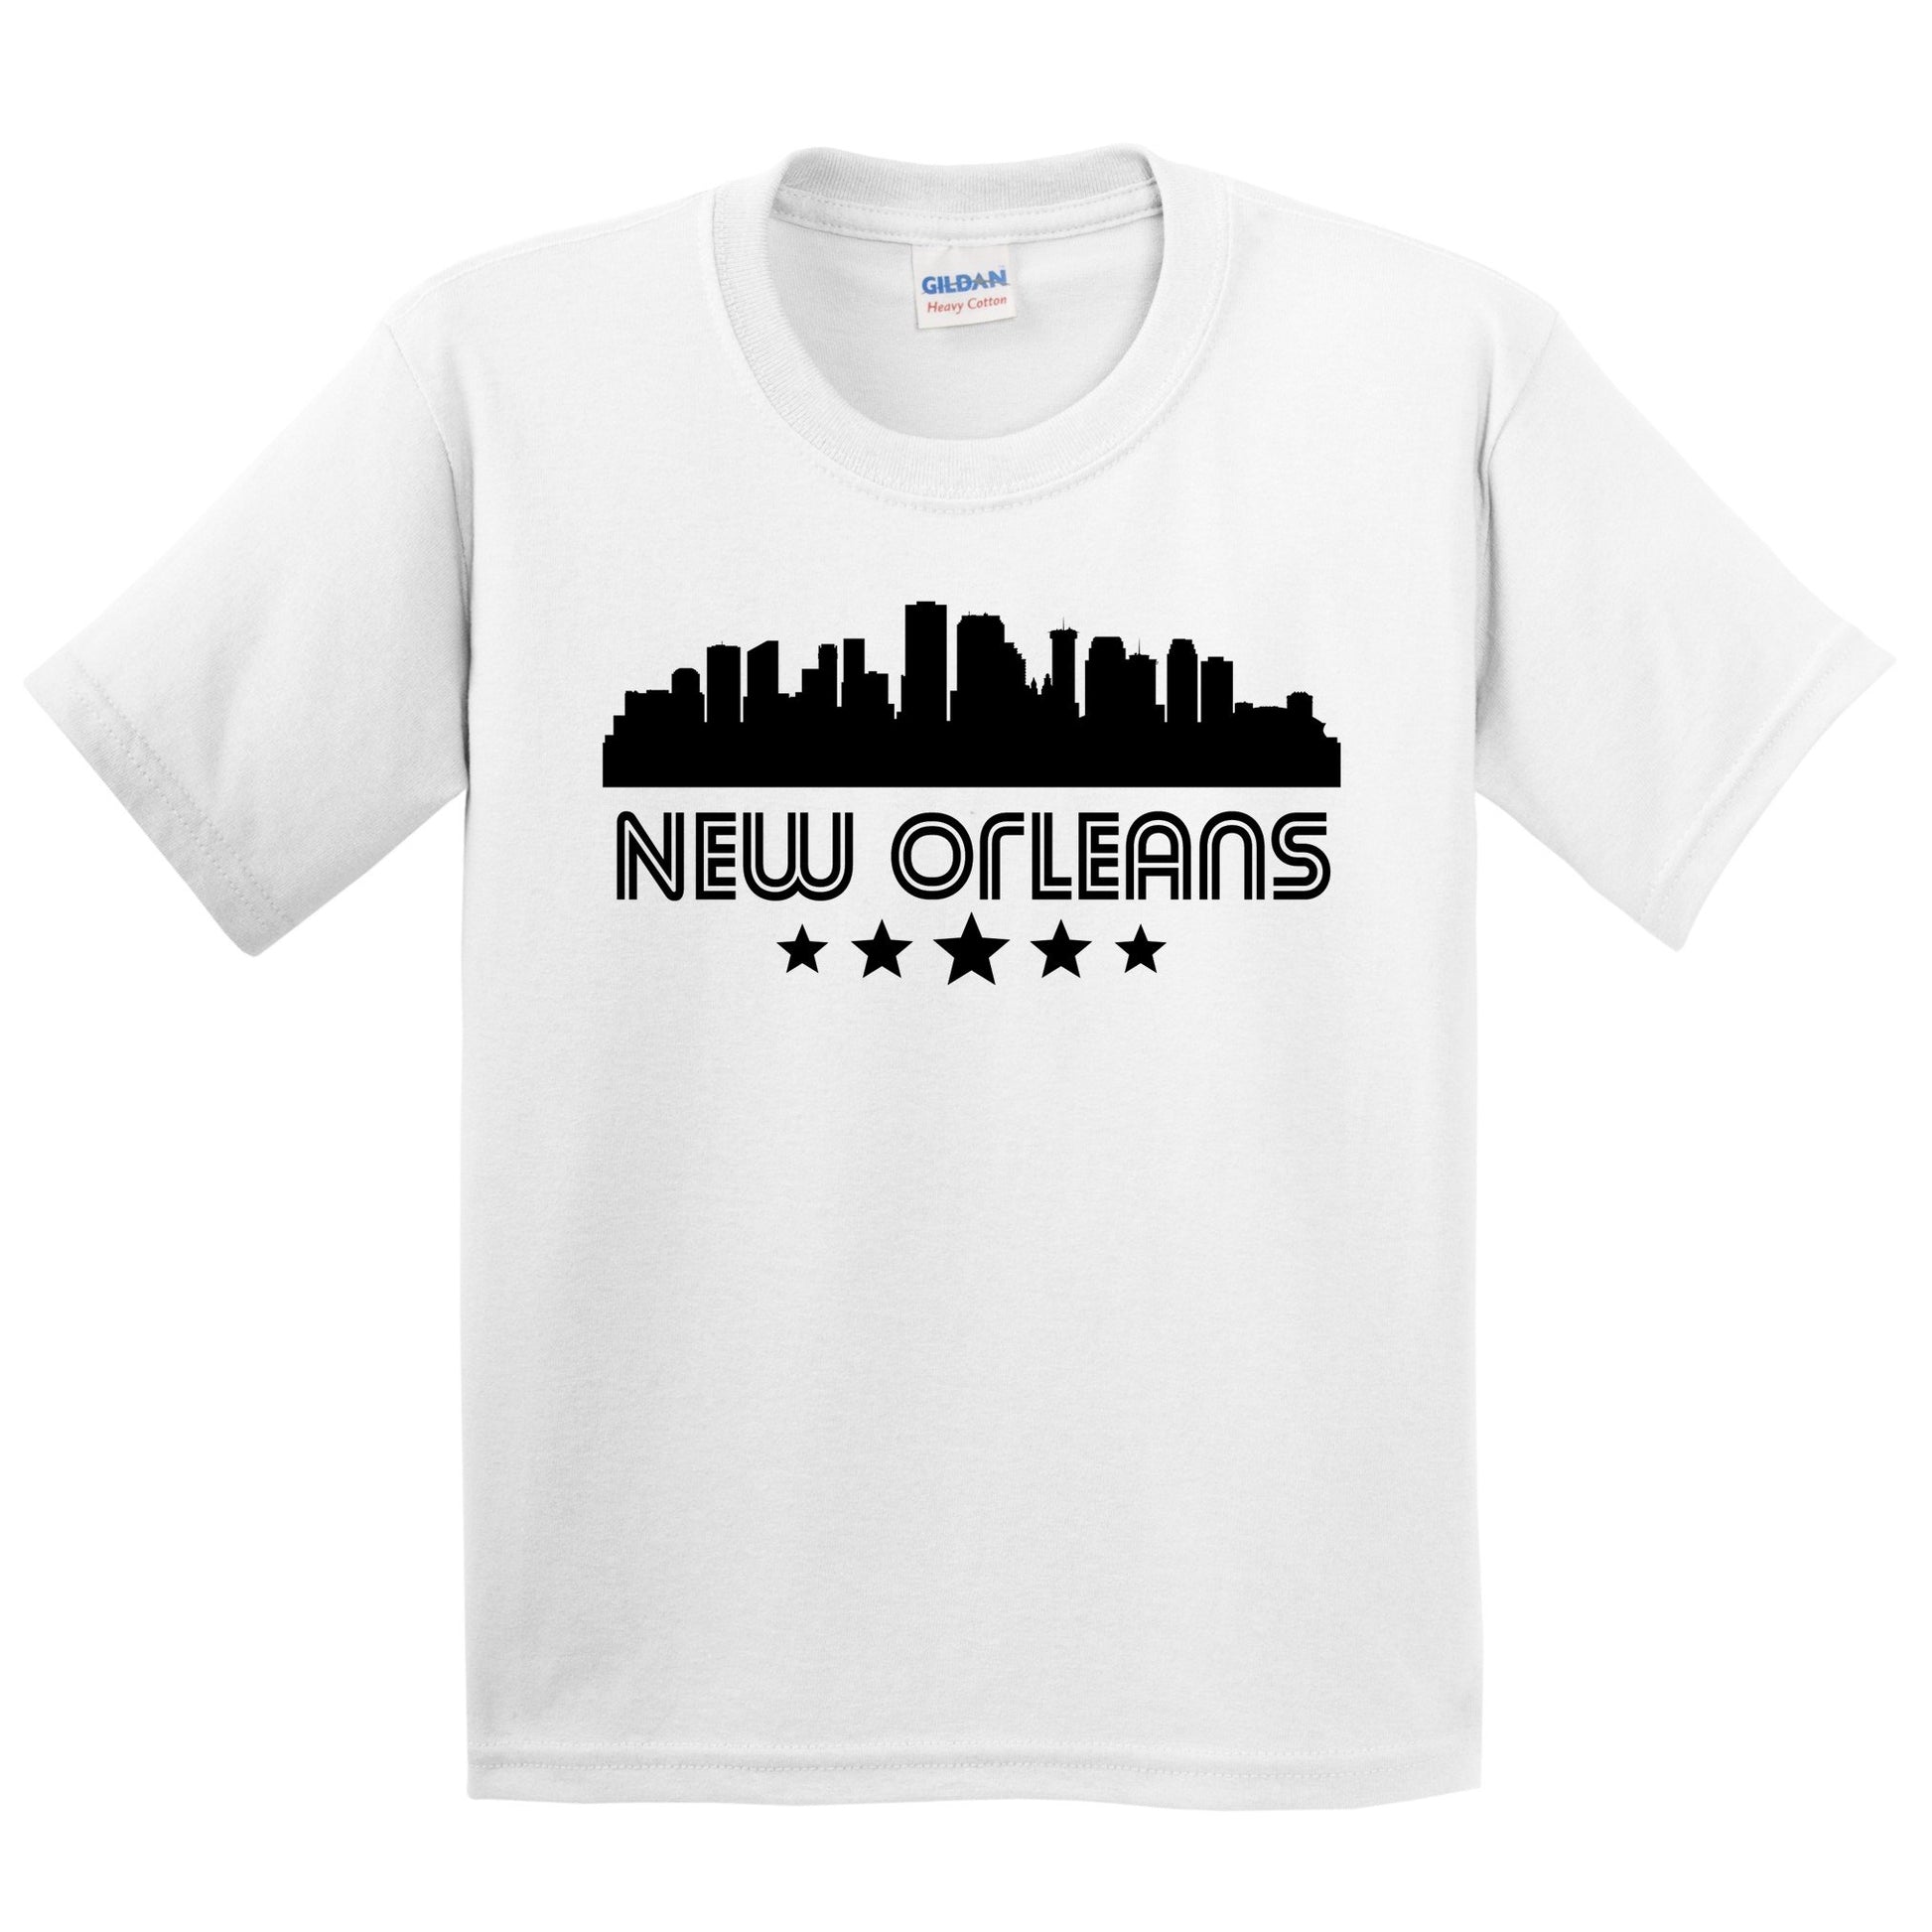 New Orleans, Louisiana T-Shirts, Vintage Apparel